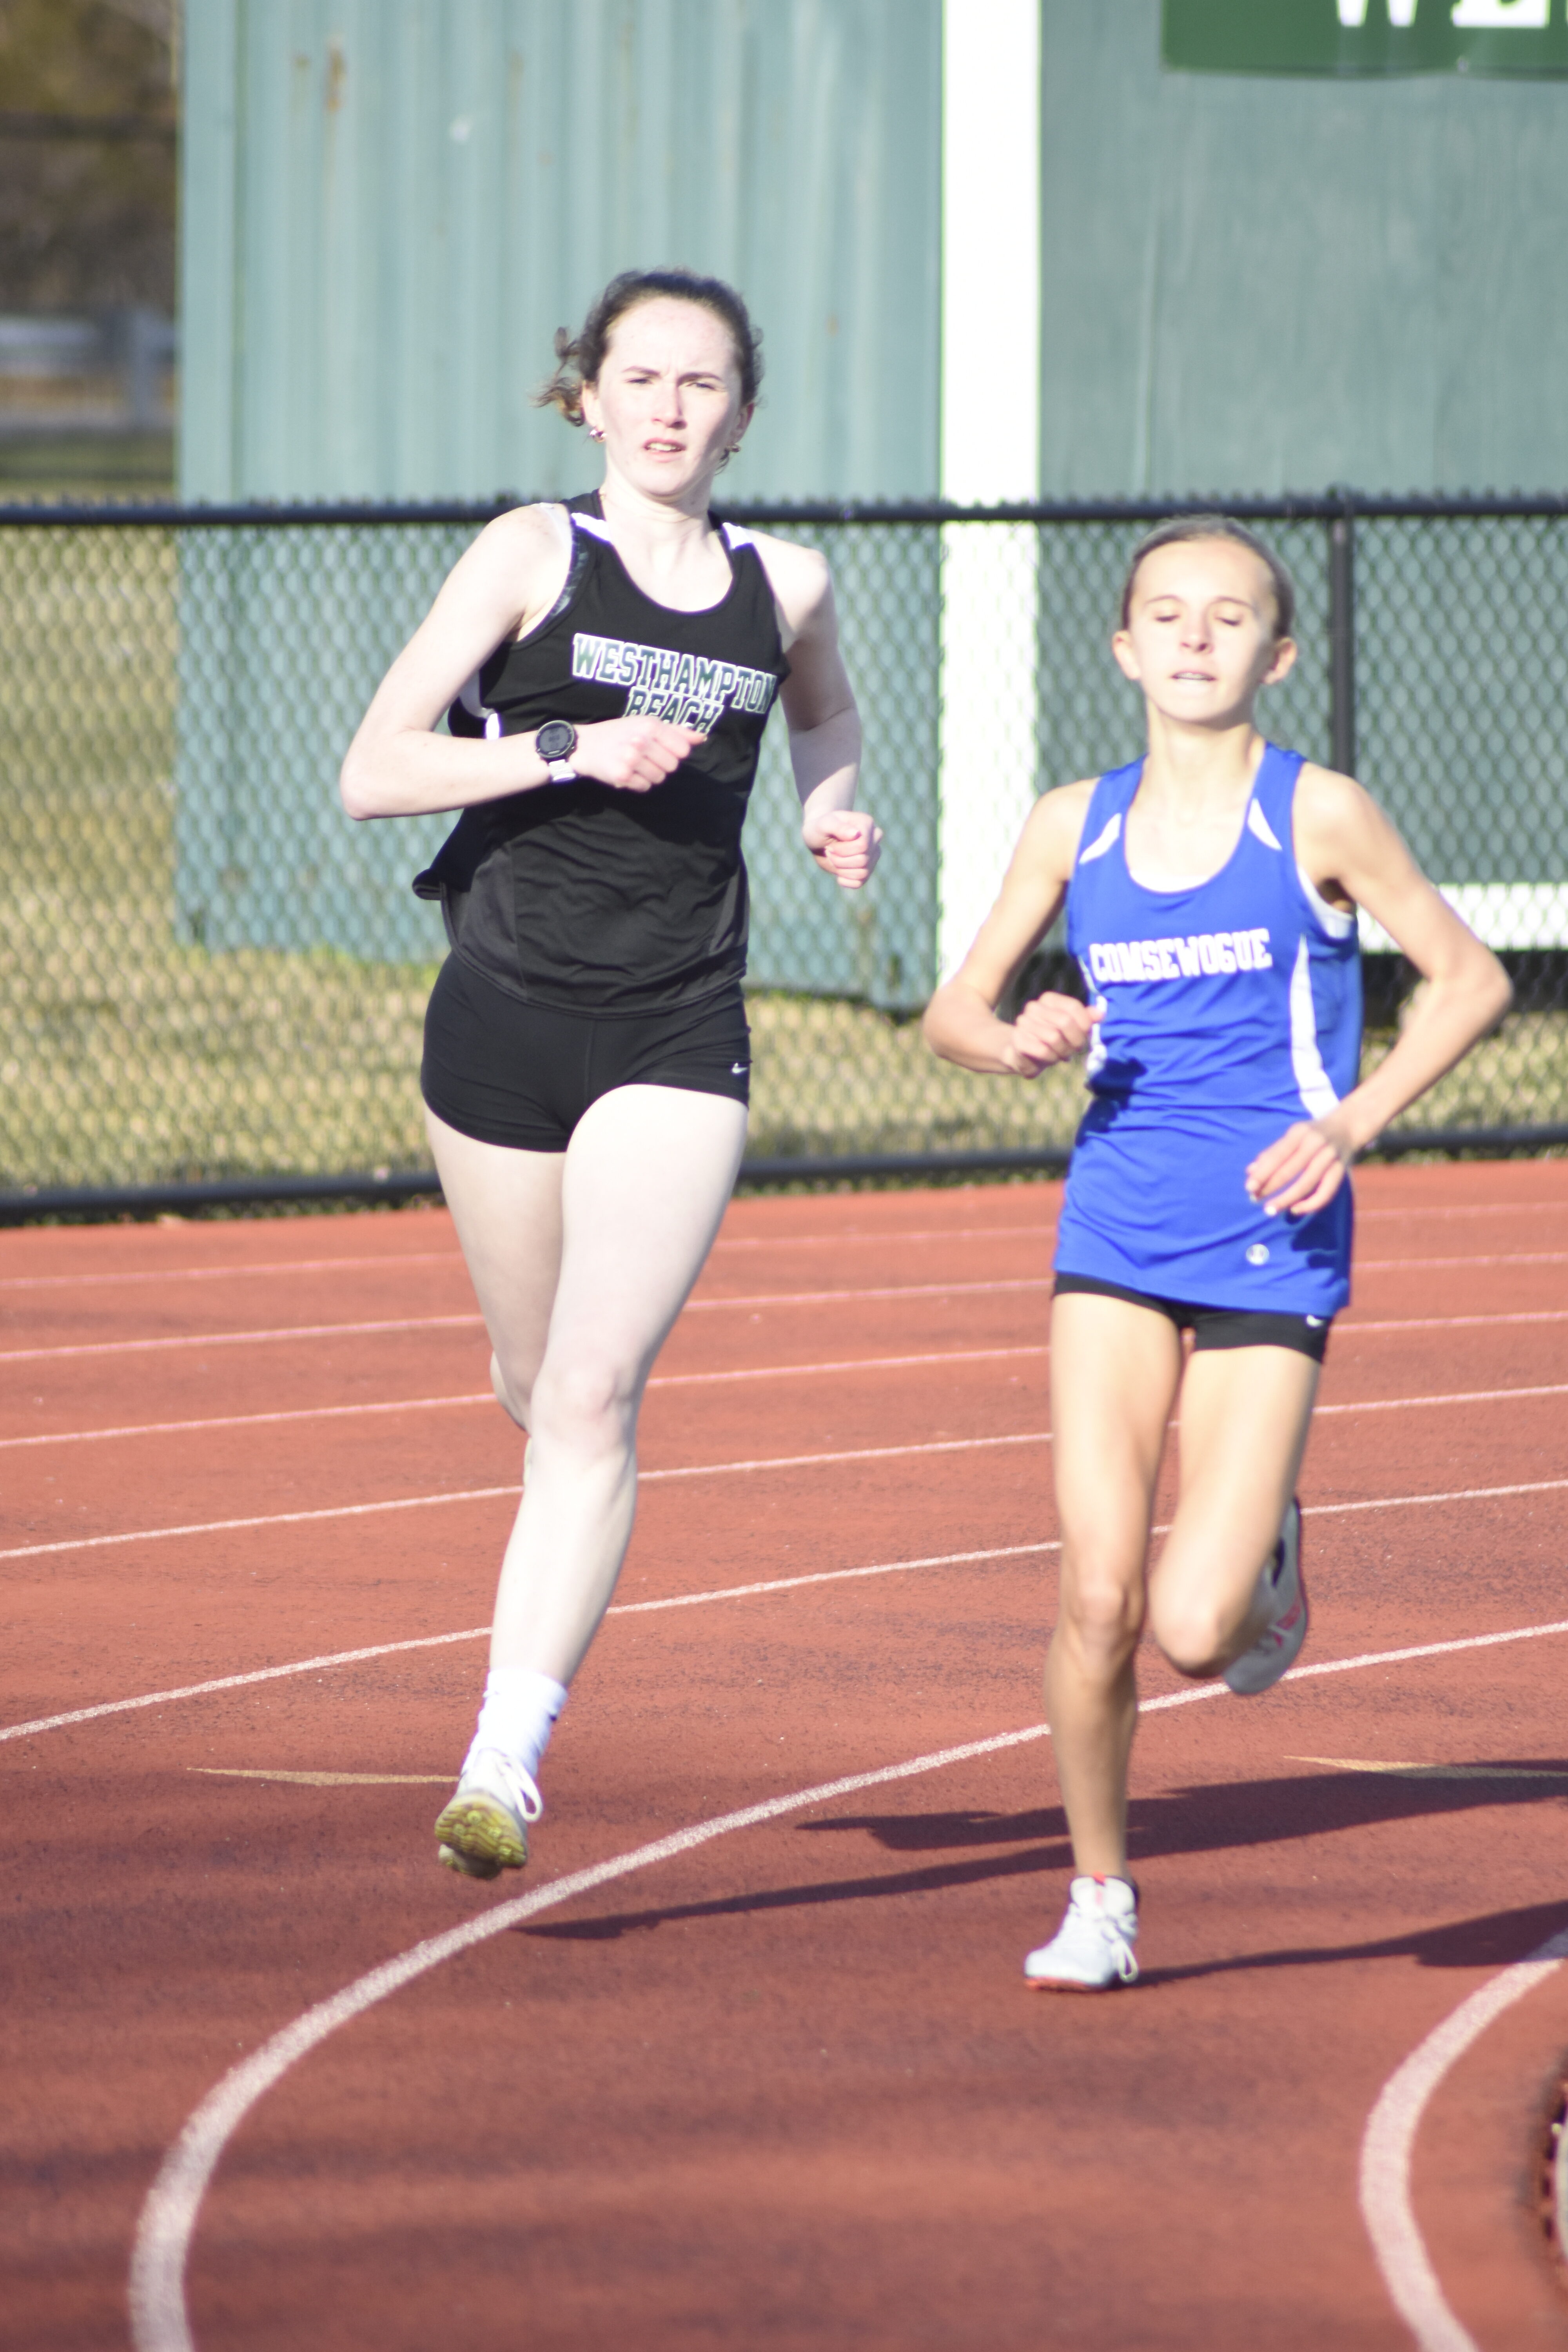 Oona Murphy is a key returning runner for the Hurricane girls this season and should be a big contributor in the mid to long distances.  DREW BUDD